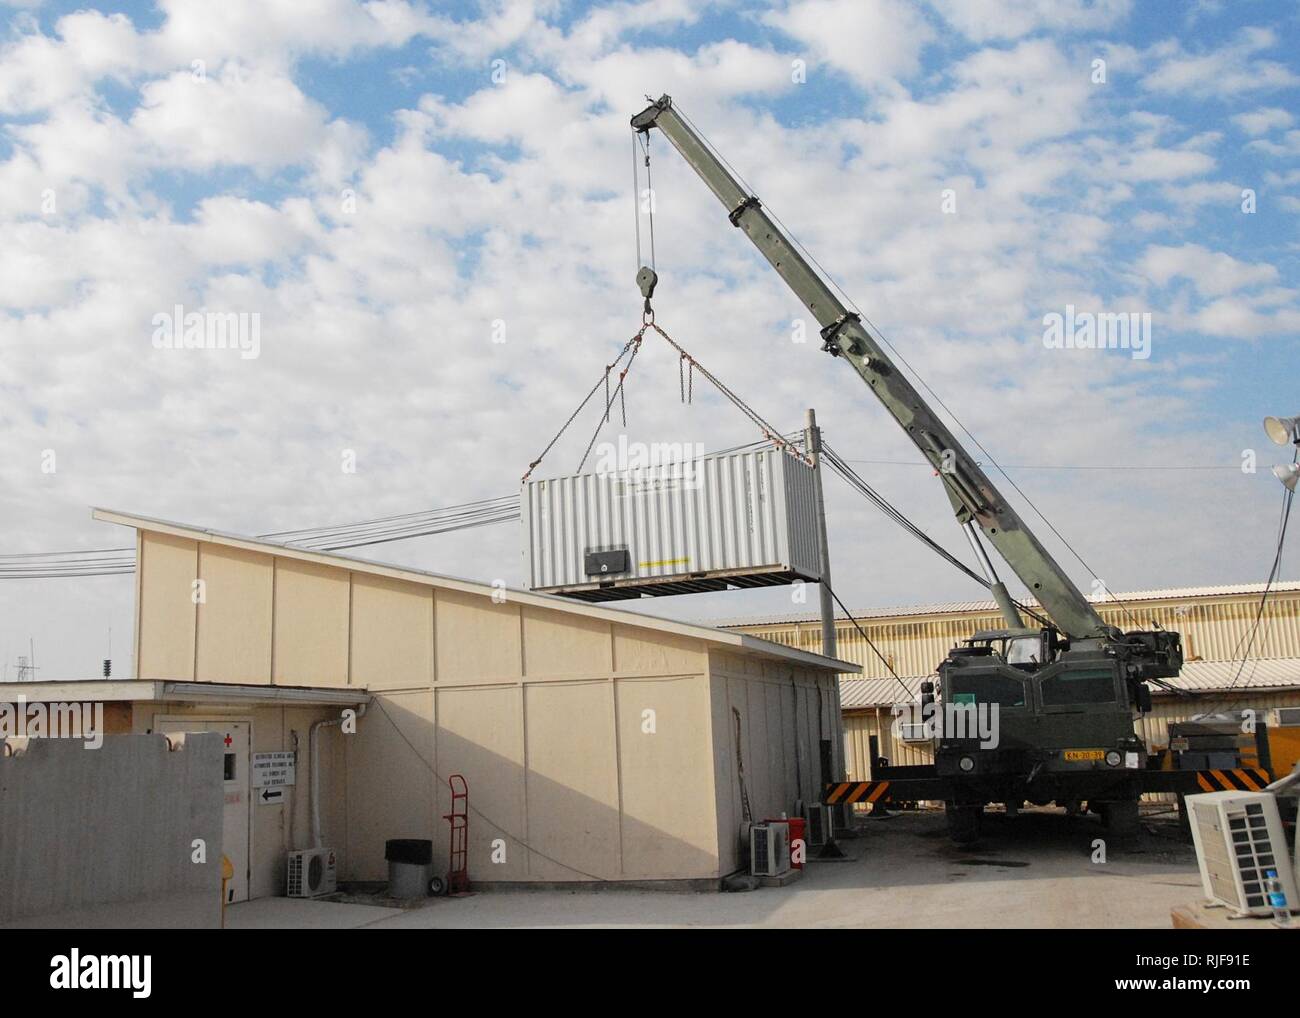 KANDAHAR, Afghanistan--A crane lifts a power supply container that was occupying the space where a new medical operation facility will be put in place at the ROLE 3 Hospital near Kandahar Air Field on February 3, 2008. The one-day project is a joint venture with the Task Forces operating in the ISAF RC South area of operation. The new operation room is expected to be fully operational later in the week. ISAF Stock Photo